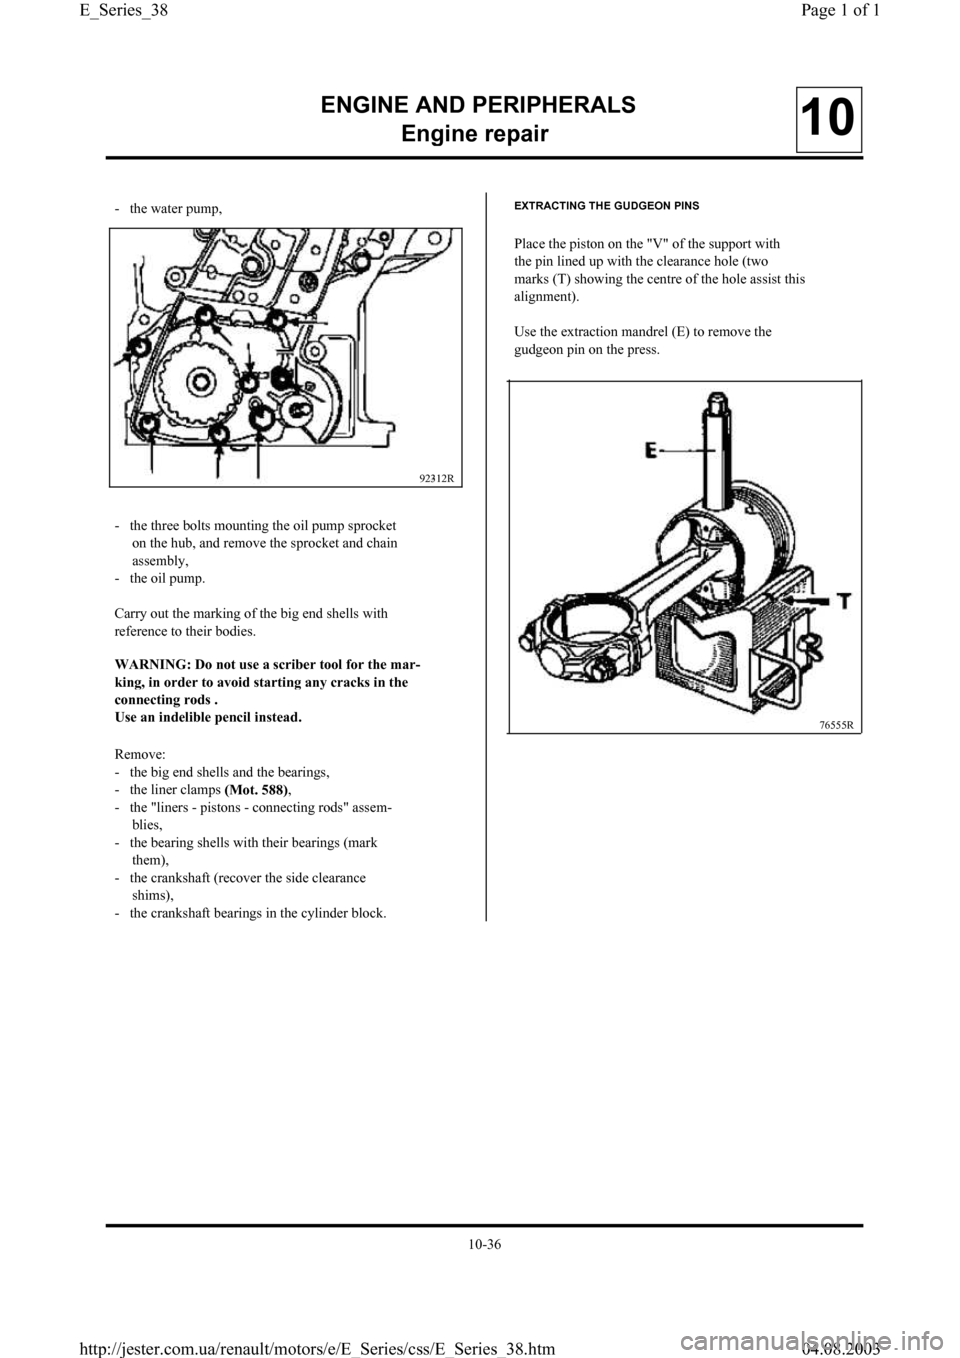 RENAULT CLIO 1997 X57 / 1.G Petrol Engines Owners Guide ENGINE AND PERIPHERALS
En
gine repair10
-   the water pump,
92312R
-   the three bolts mounting the oil pump sprocket
on the hub, and remove the sprocket and chain
assembly,
-   the oil pump.
Carry ou